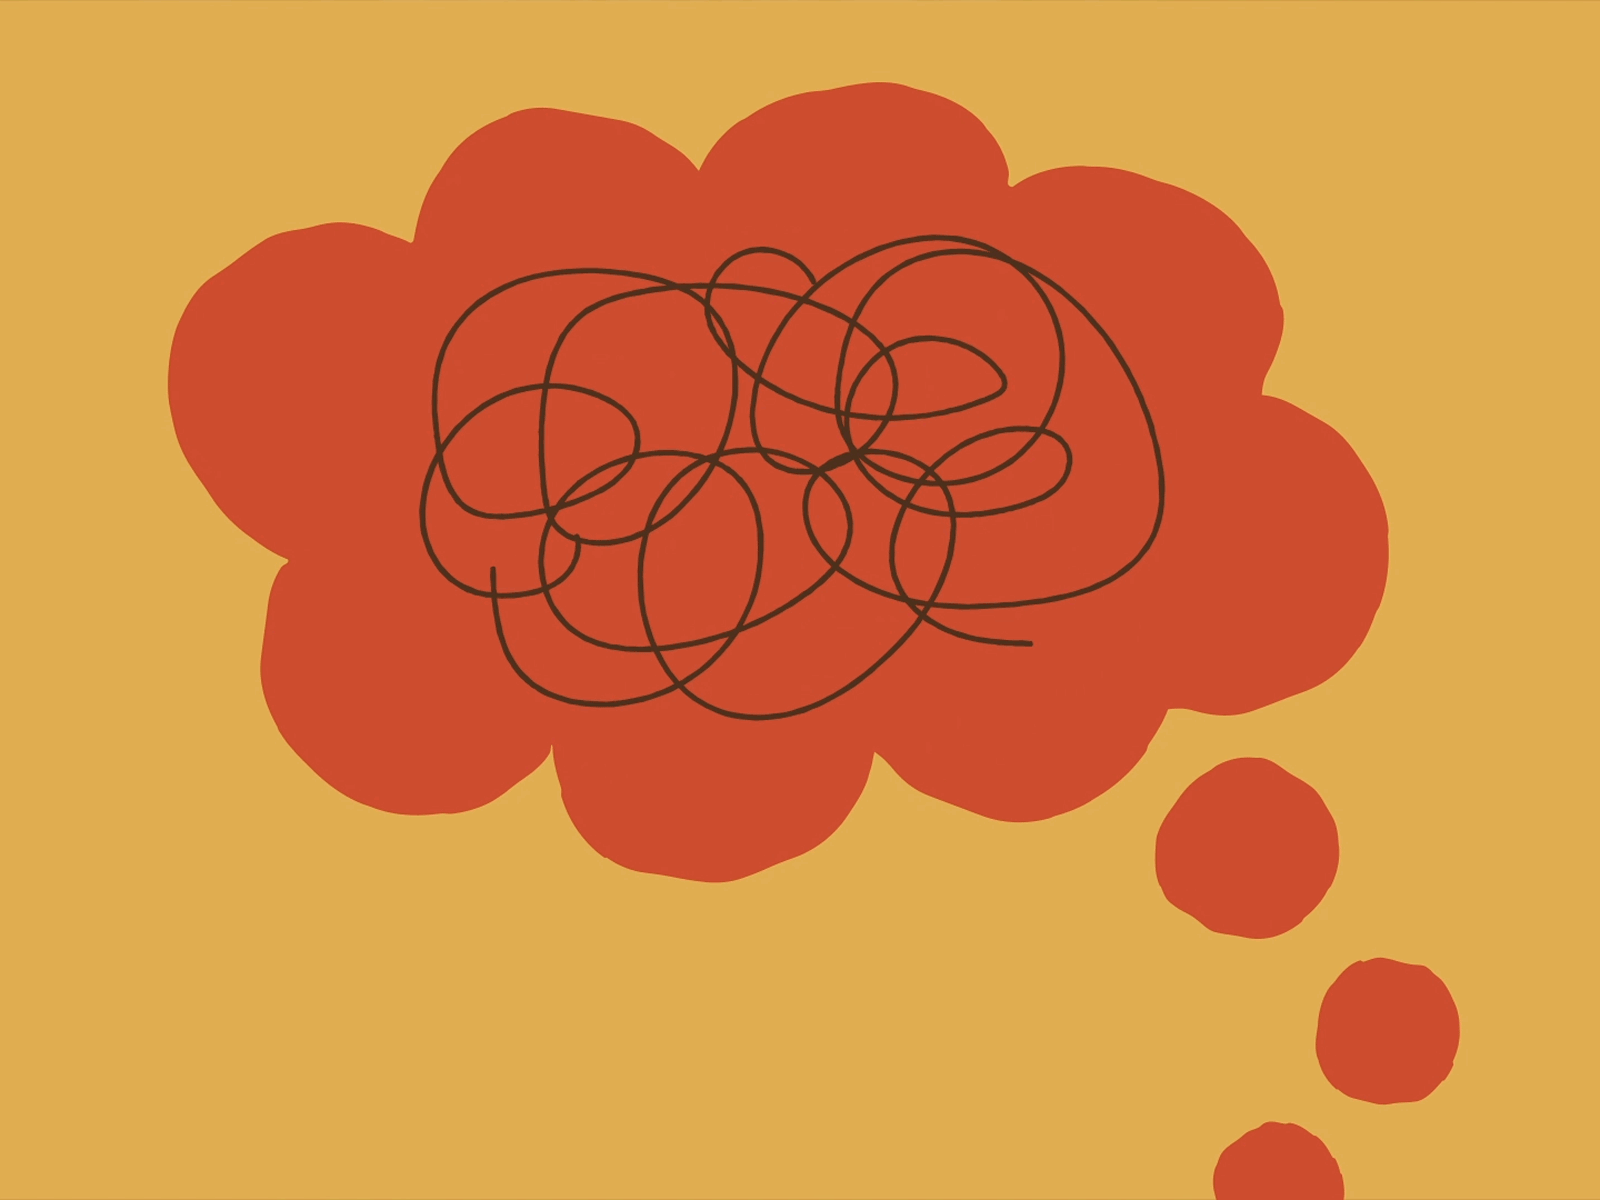 Challenging ideas after effects animation bubble challenge chat cloud confused cutout idea illustration limited palette paper papercut scribble stop motion stopmotion thinking thought warm yellow